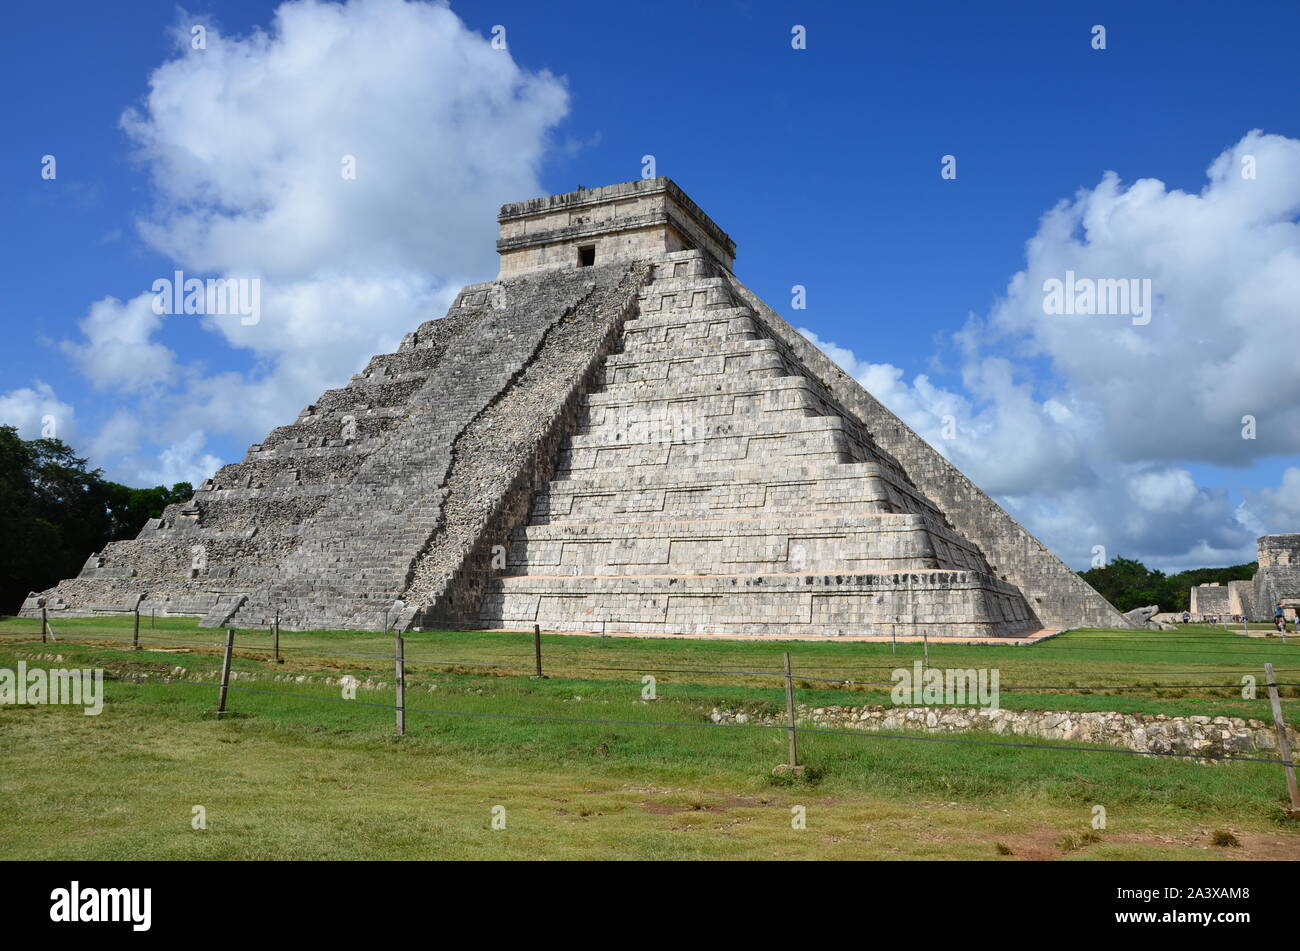 The view of the ancient temple in Mexico Stock Photo